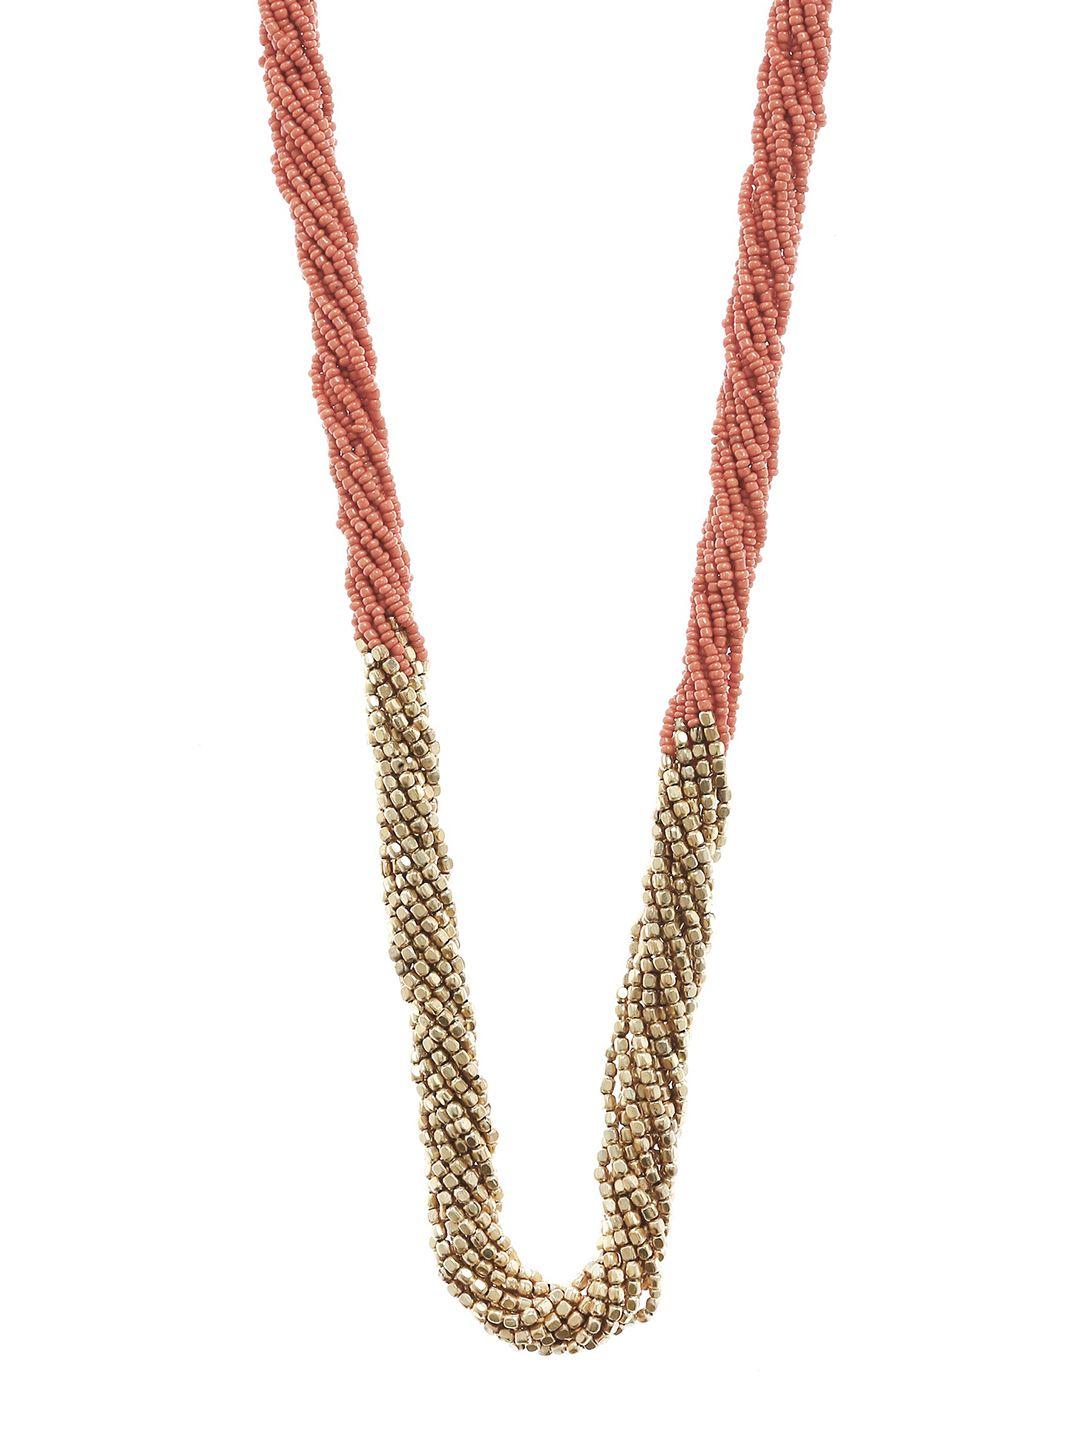 bamboo tree jewels peach-coloured & gold-toned metal handcrafted necklace